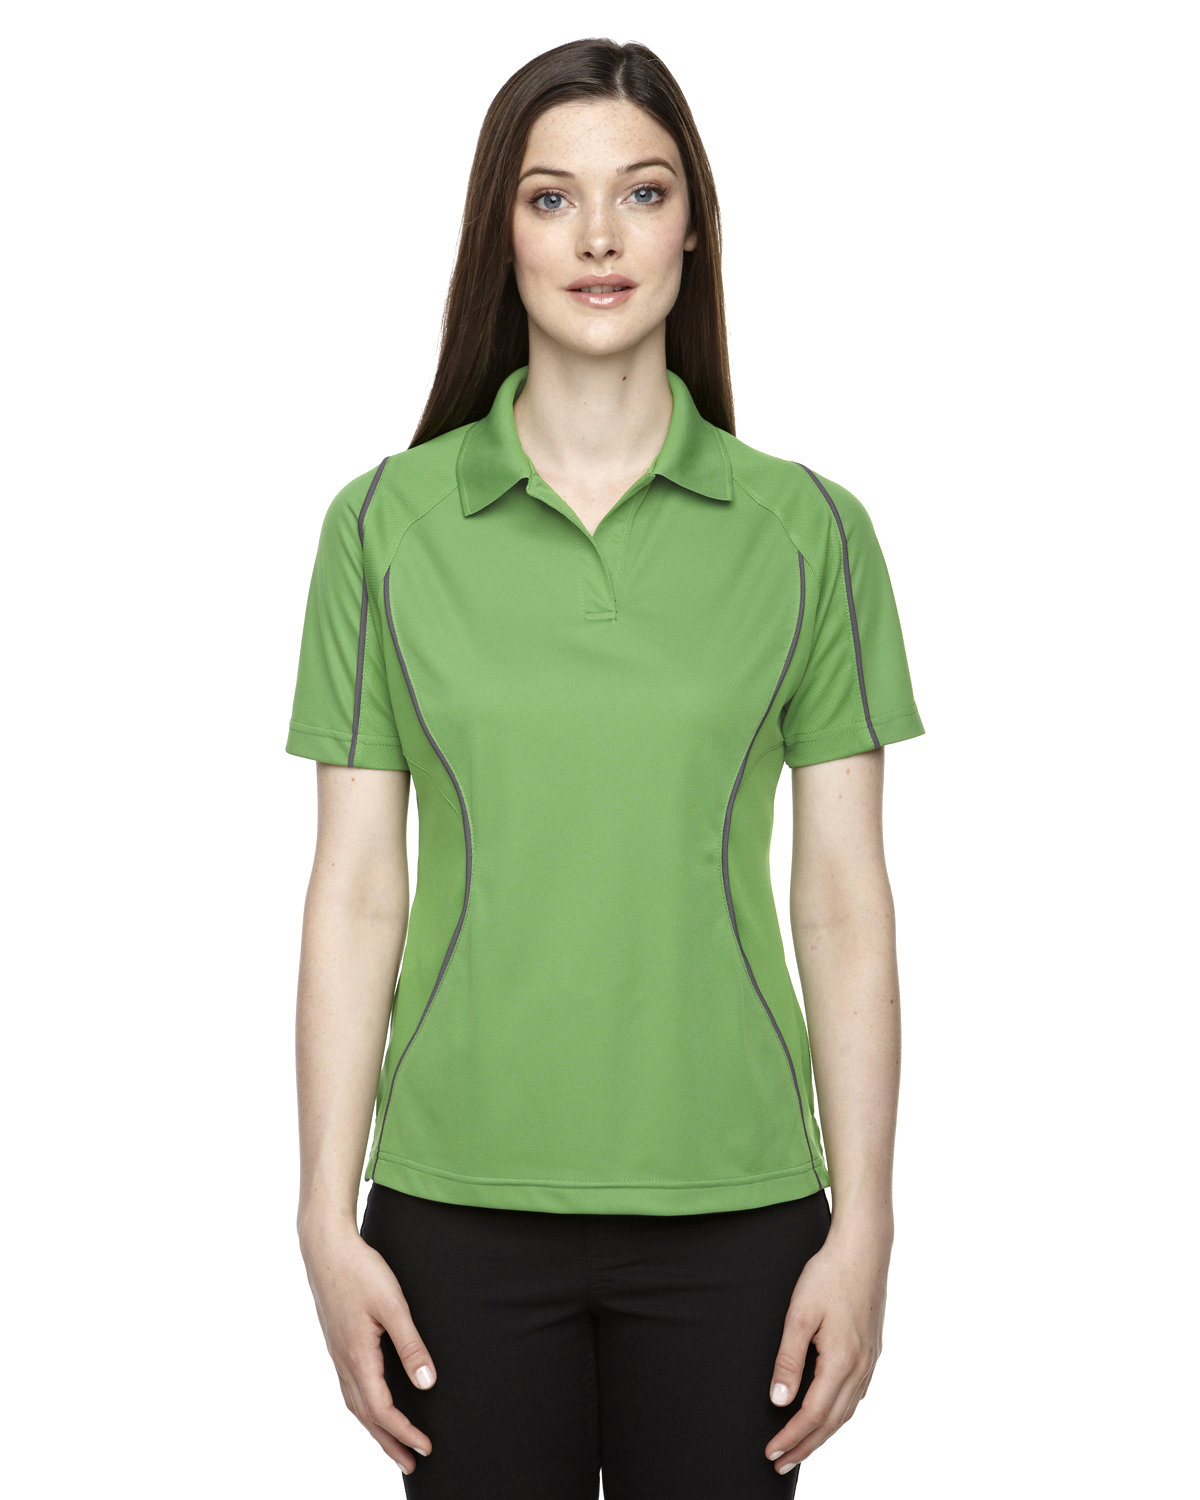 Extreme Ladies' Eperformance™ Velocity Snag Protection Colorblock Polo with Piping VALLEY GREEN 